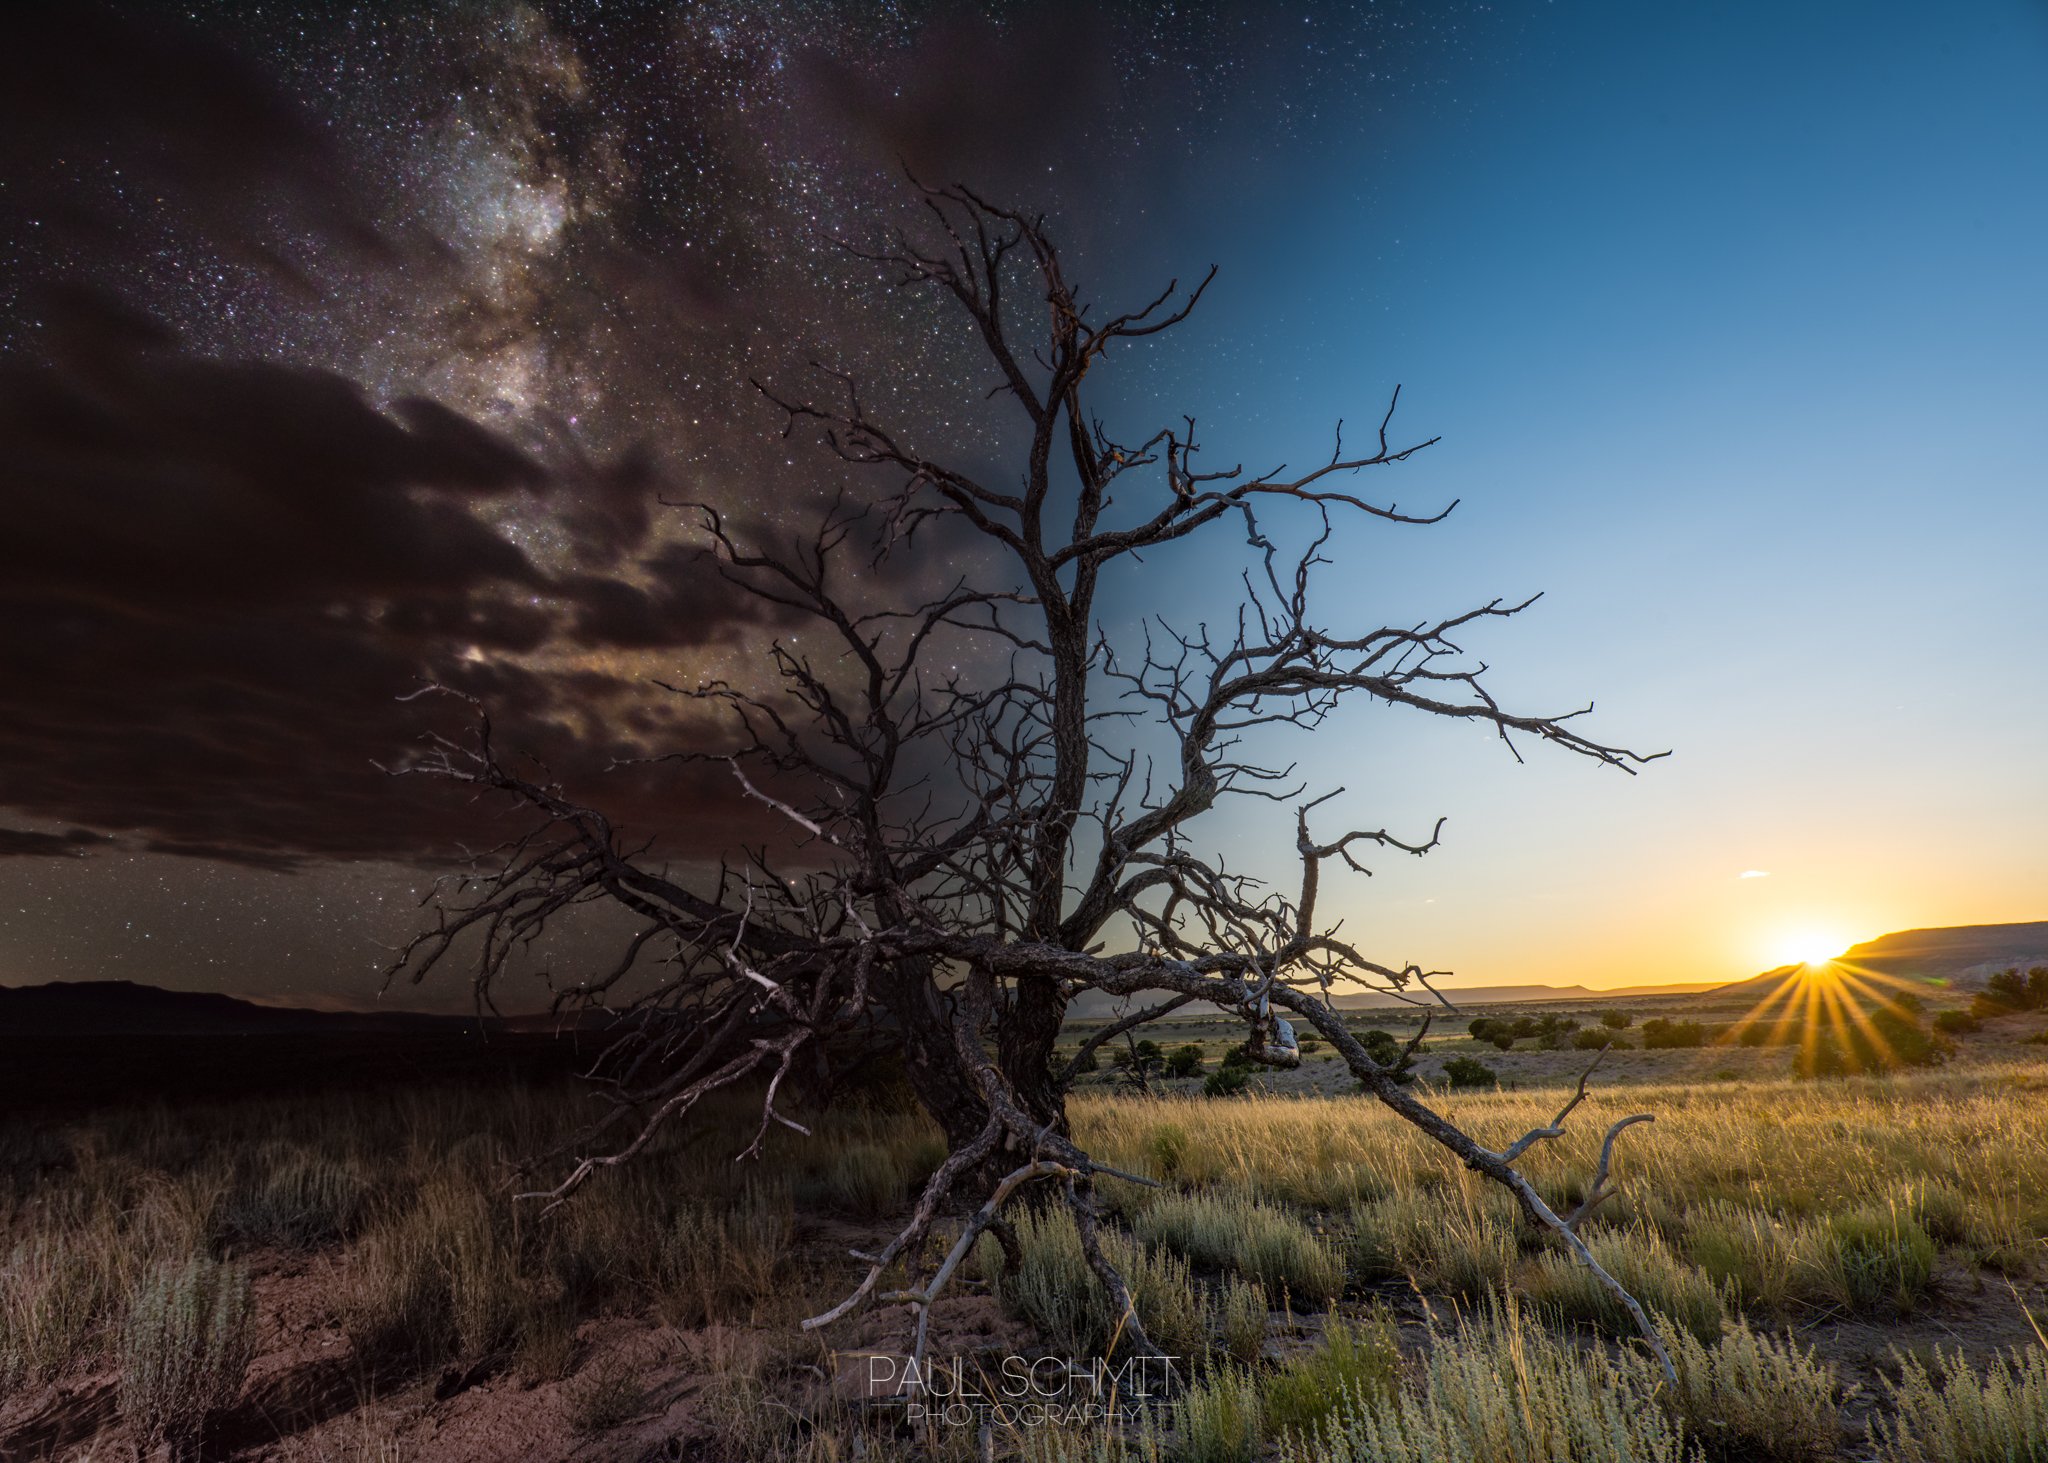 How I Capture Striking Time-Blended Astrolandscapes, and You Can Too